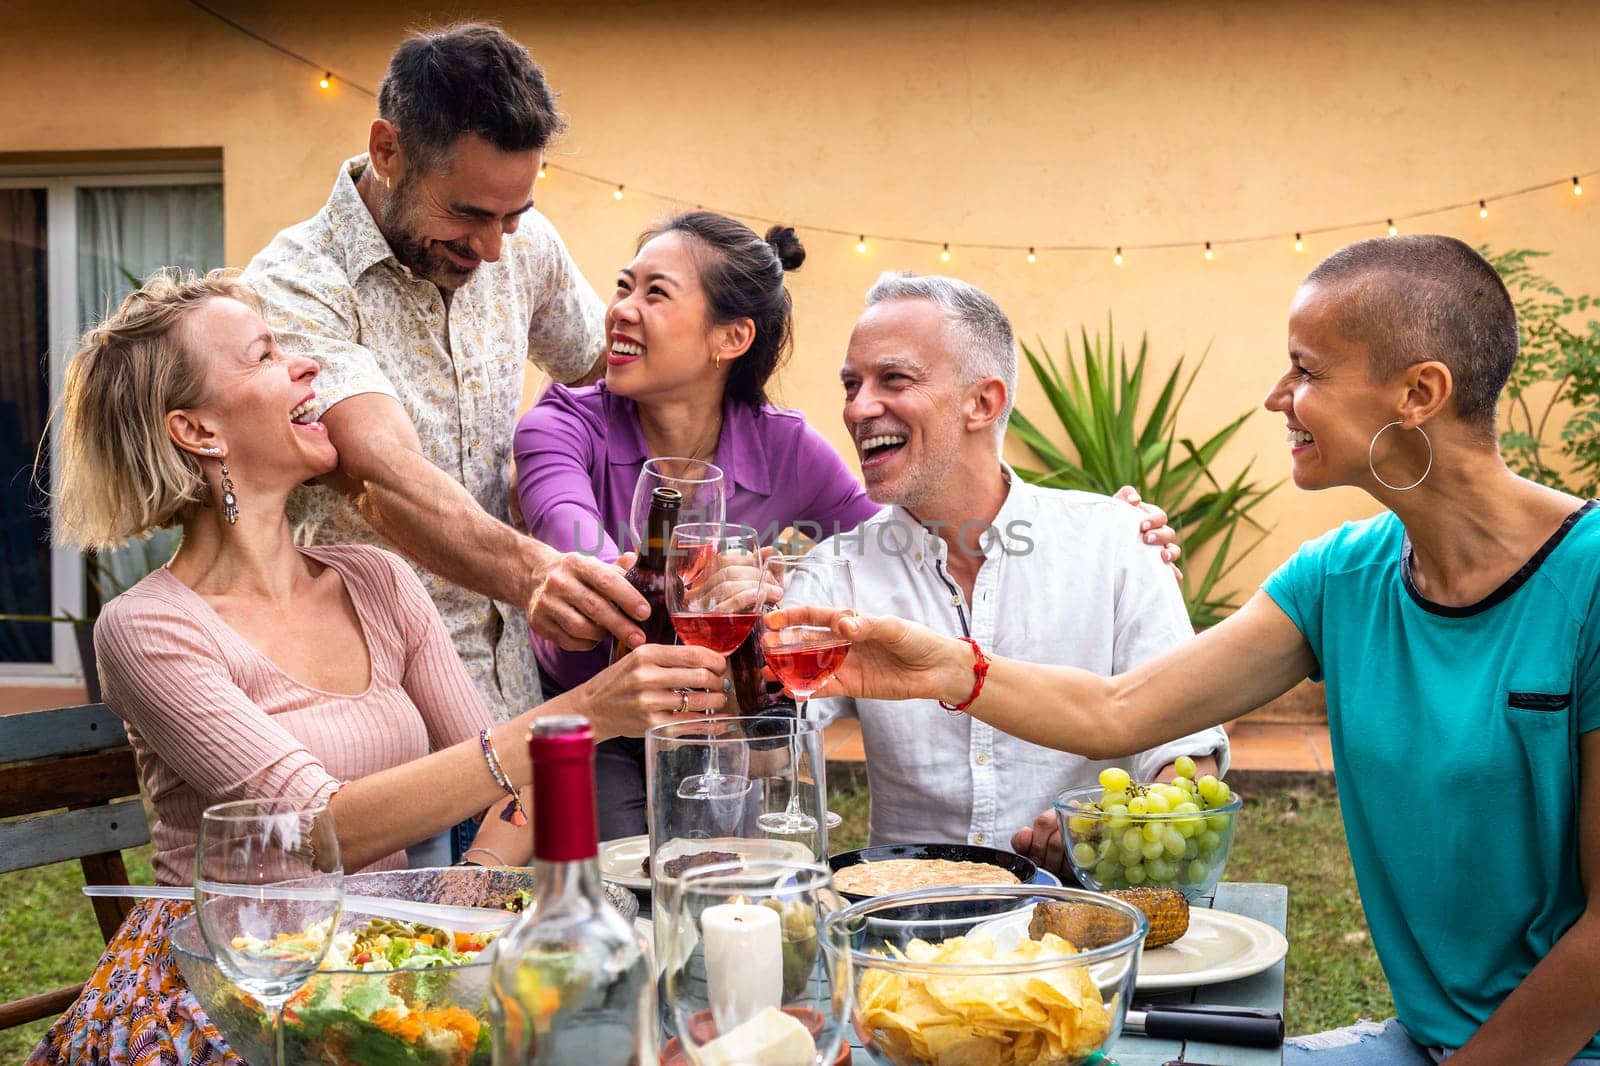 Group of friends celebrating life, toasting with wine, laughing and having fun during barbecue garden dinner party. Lifestyle.